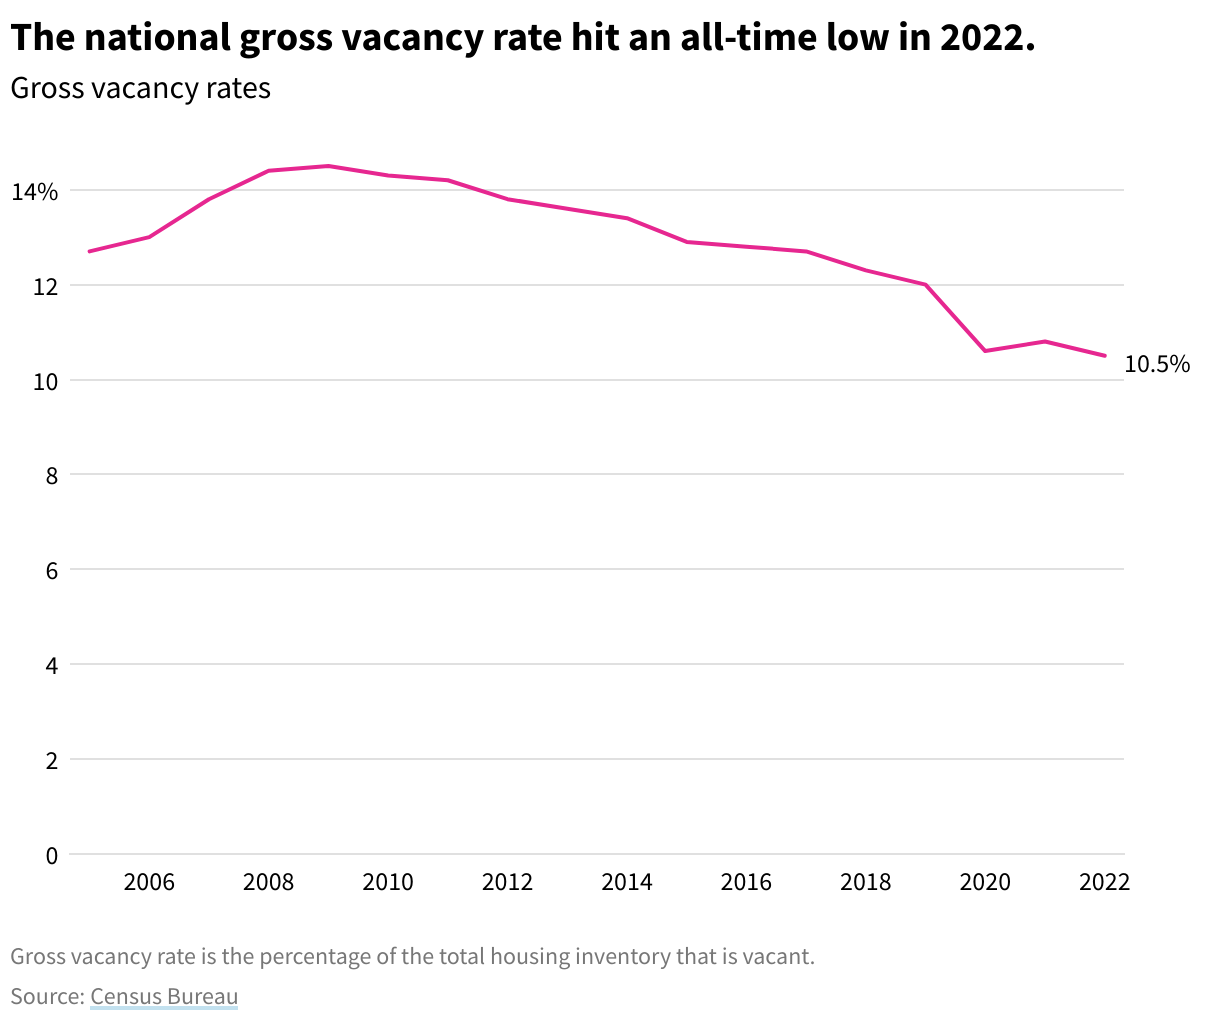 Line chart showing the gross vacancy rate over time, reaching a low of 10.5% in 2022.